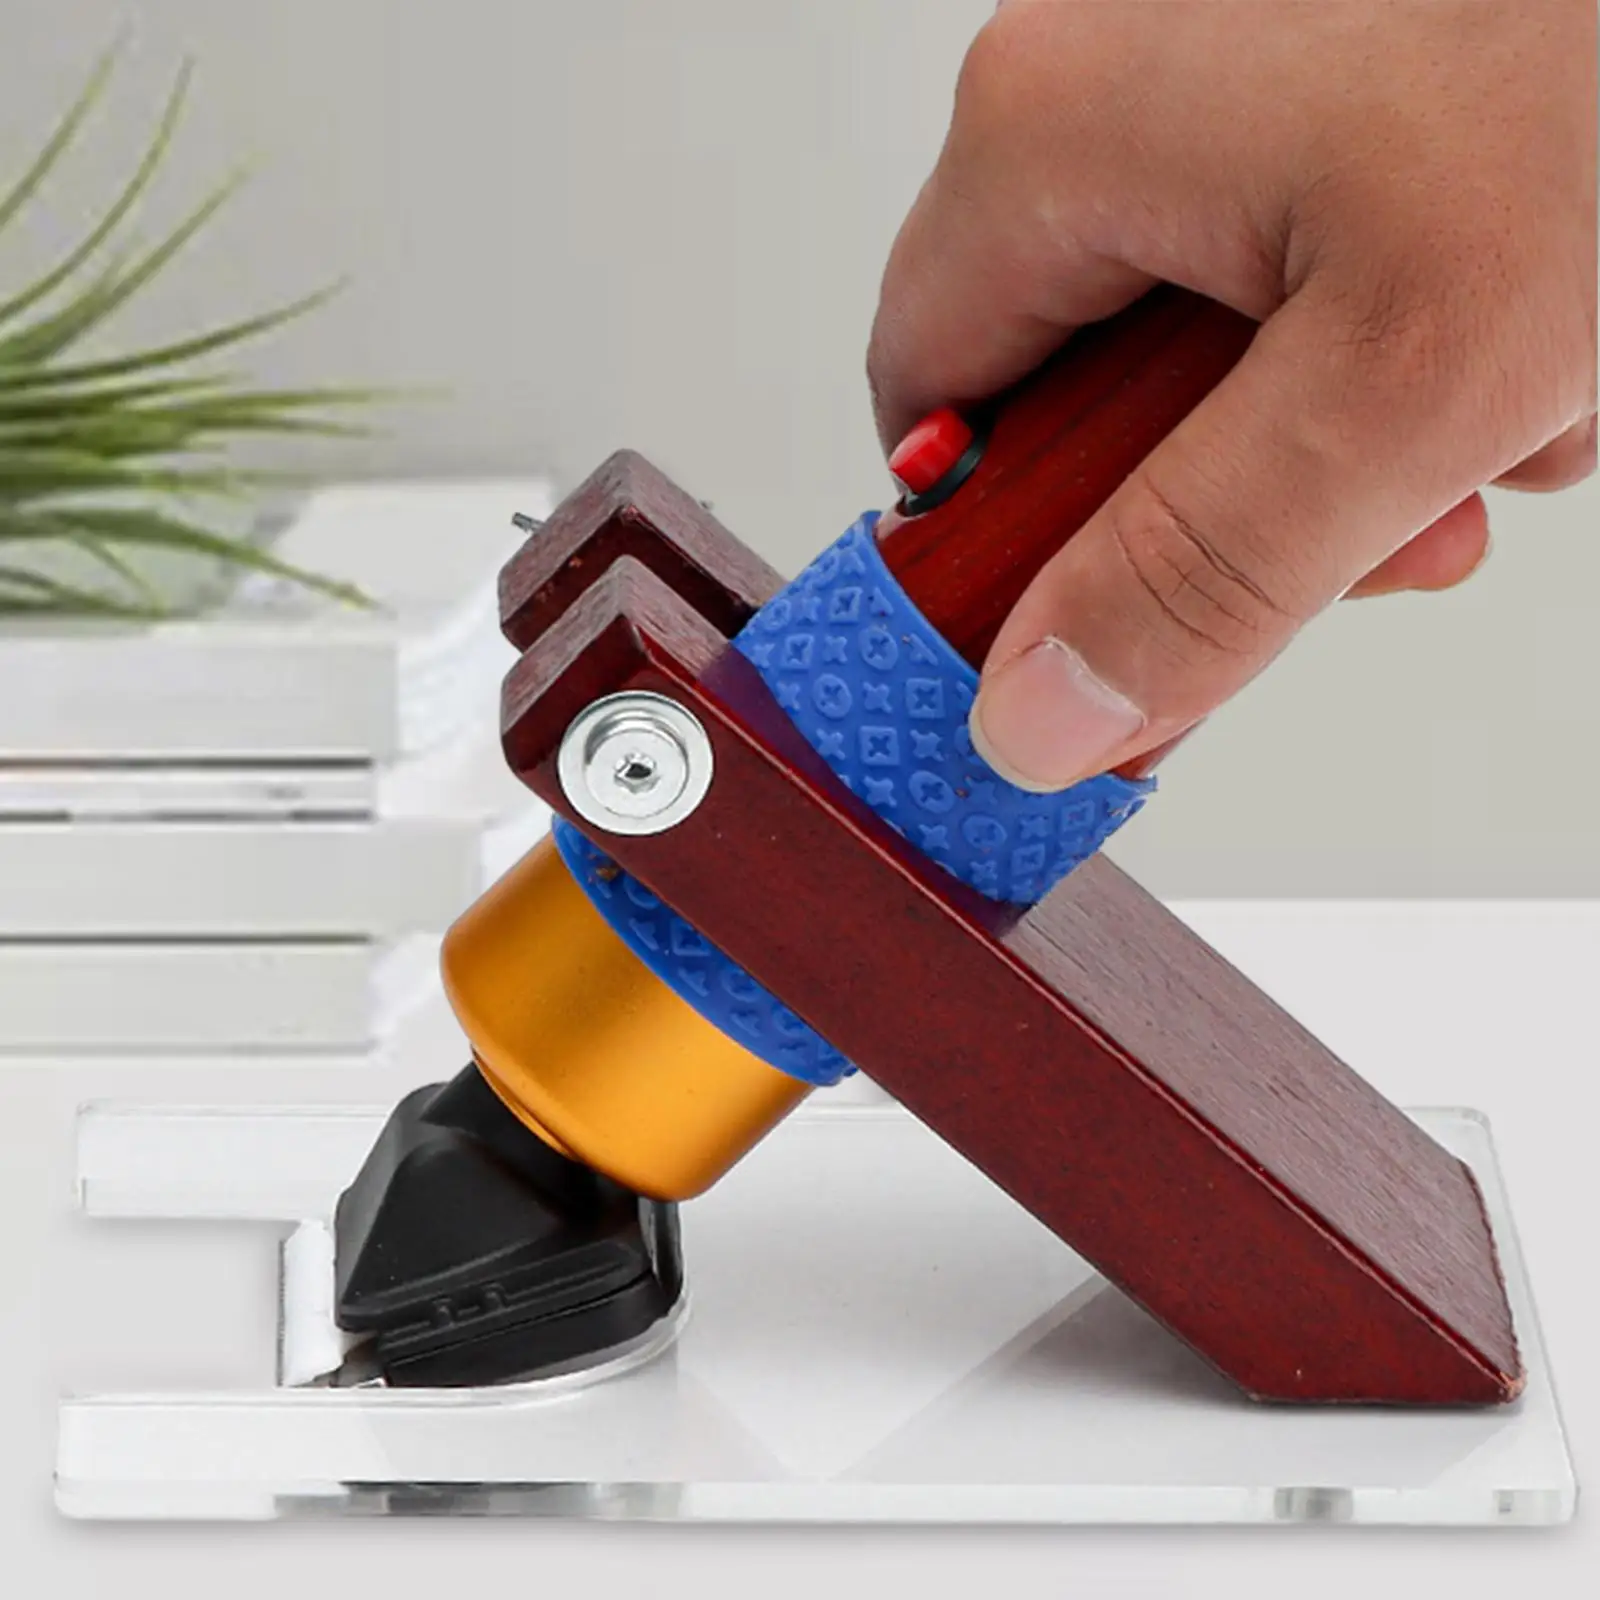 Carpet Trimmer Guide Household Accessories Trimming Area Rug Carpet Tufting Guide Sheep Clippers Holder Trimmer Machine Holder